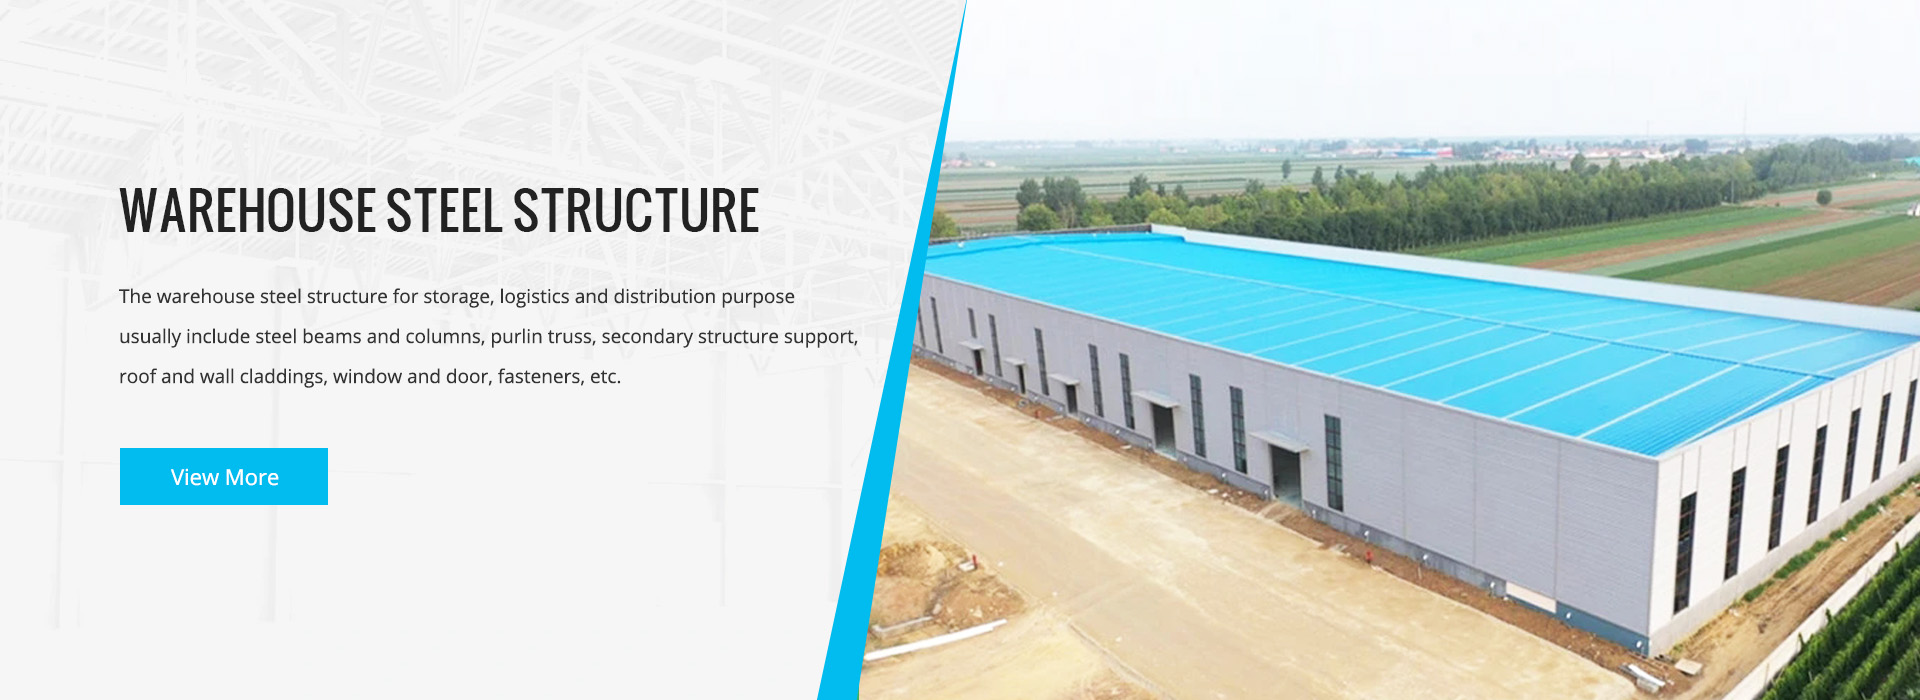 warehouse-steel-structure